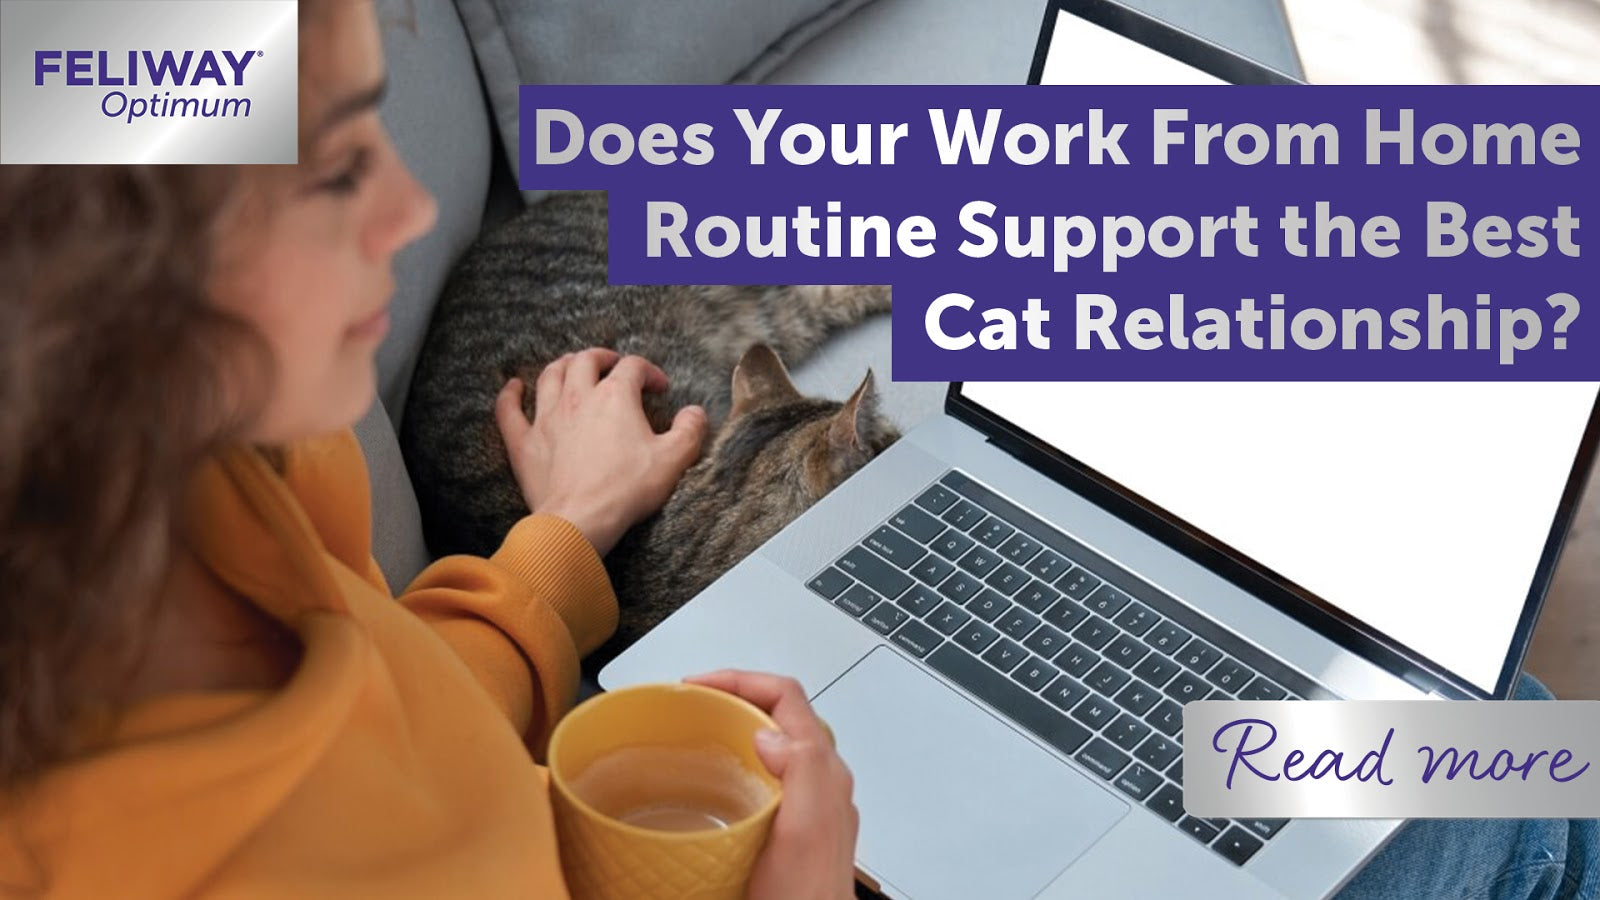 Does Your Work From Home Routine Support the Best Cat Relationship?